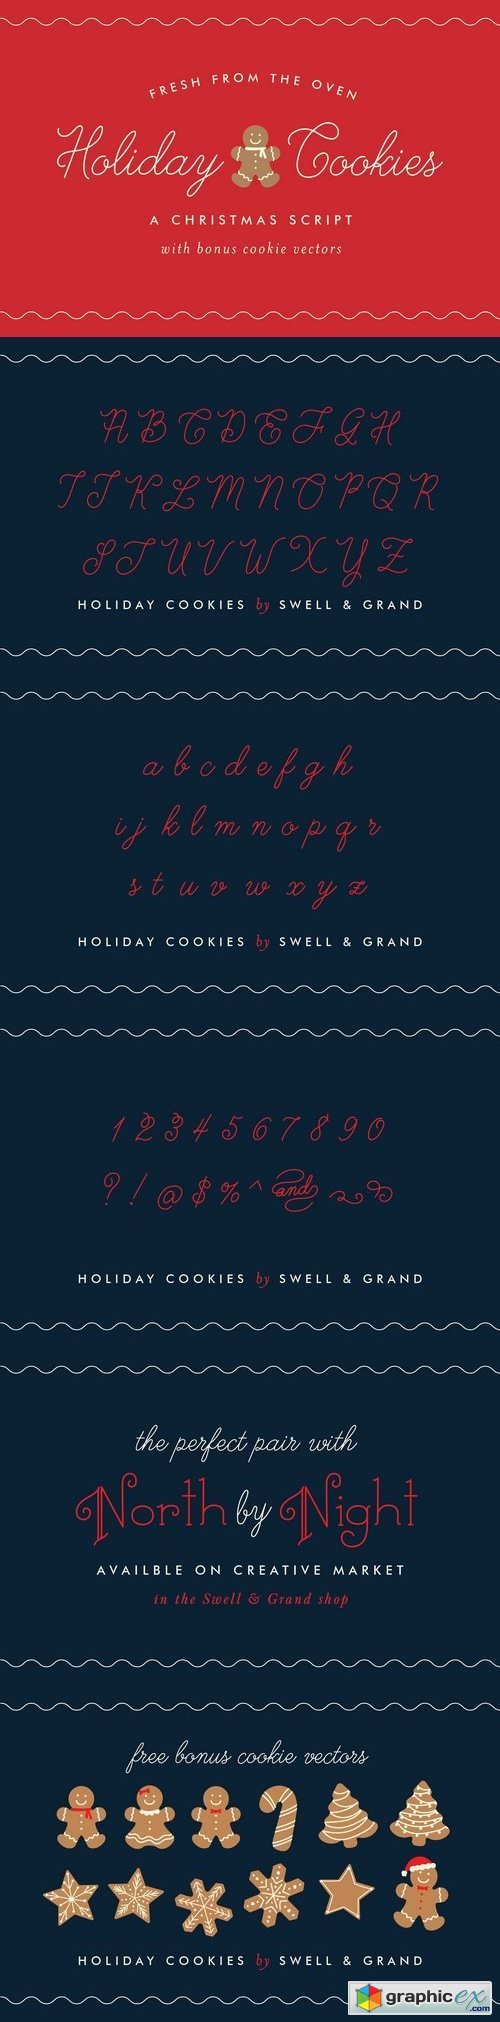 Holiday Cookies, A Christmas Script